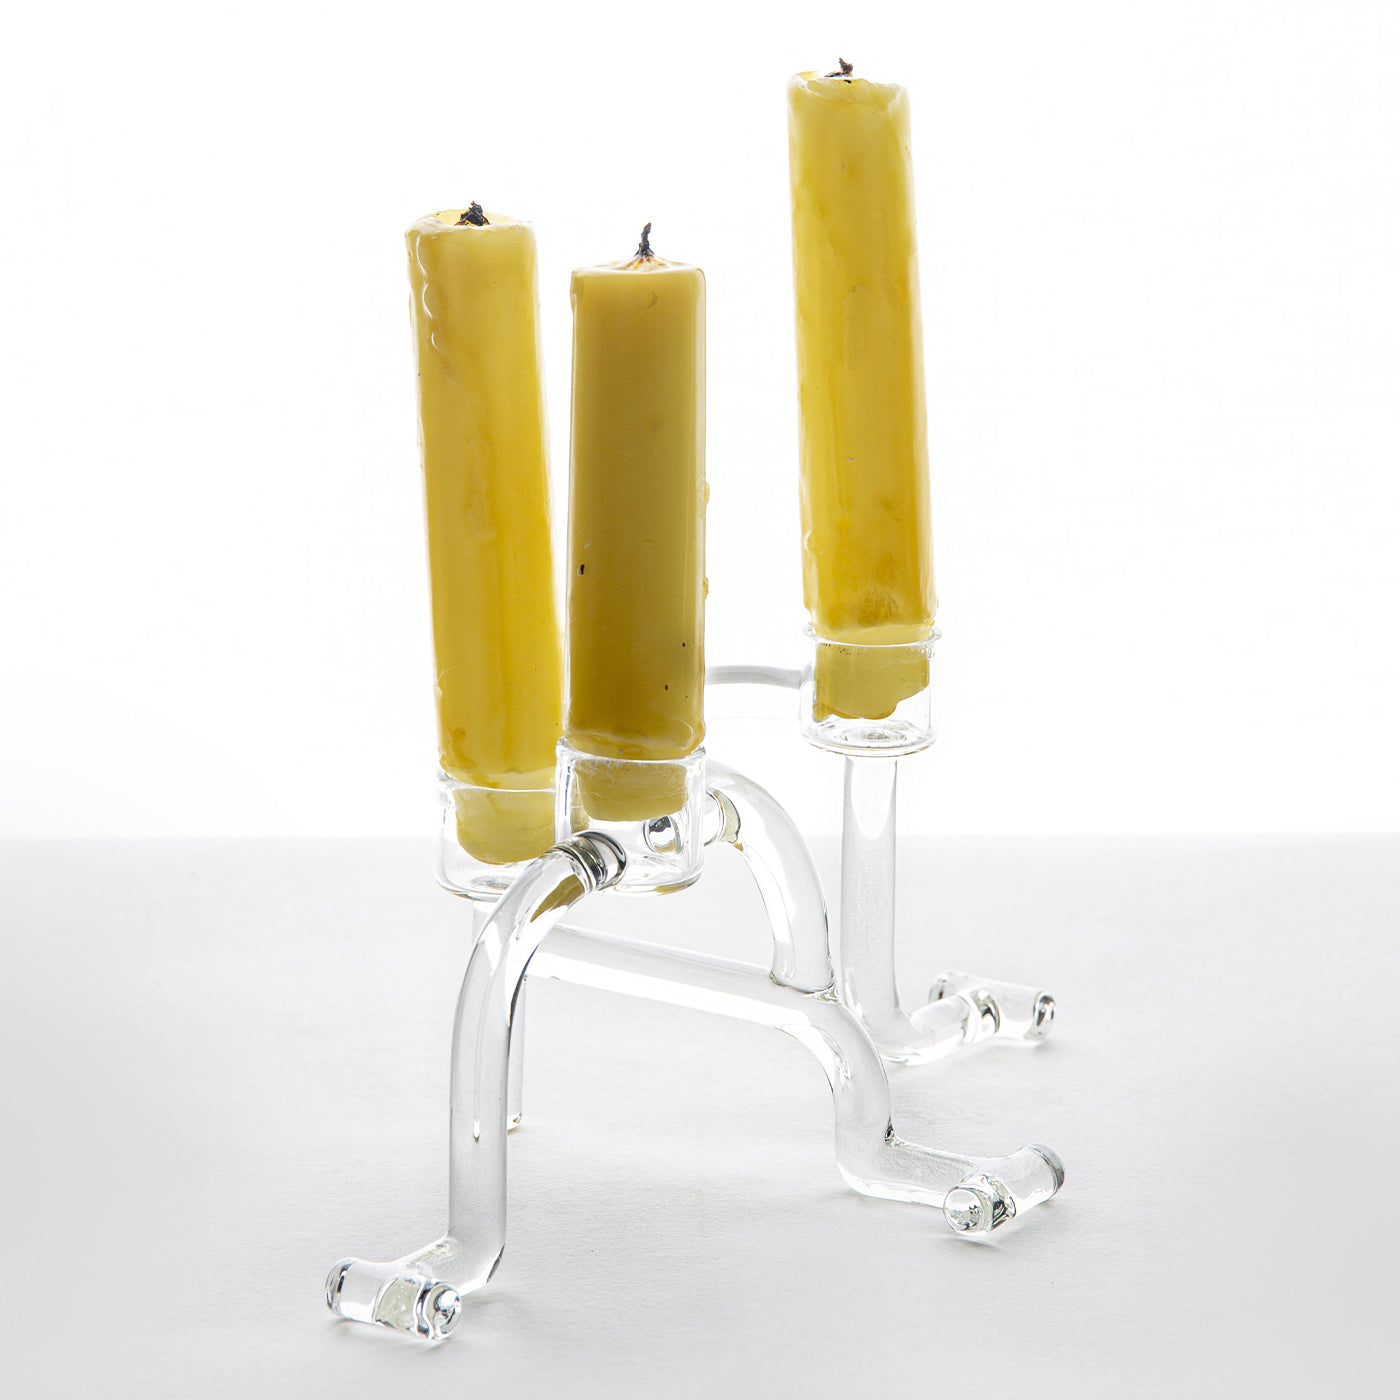 Candleholder - SiO2 Tableware Glass Collection - Alternative view 2